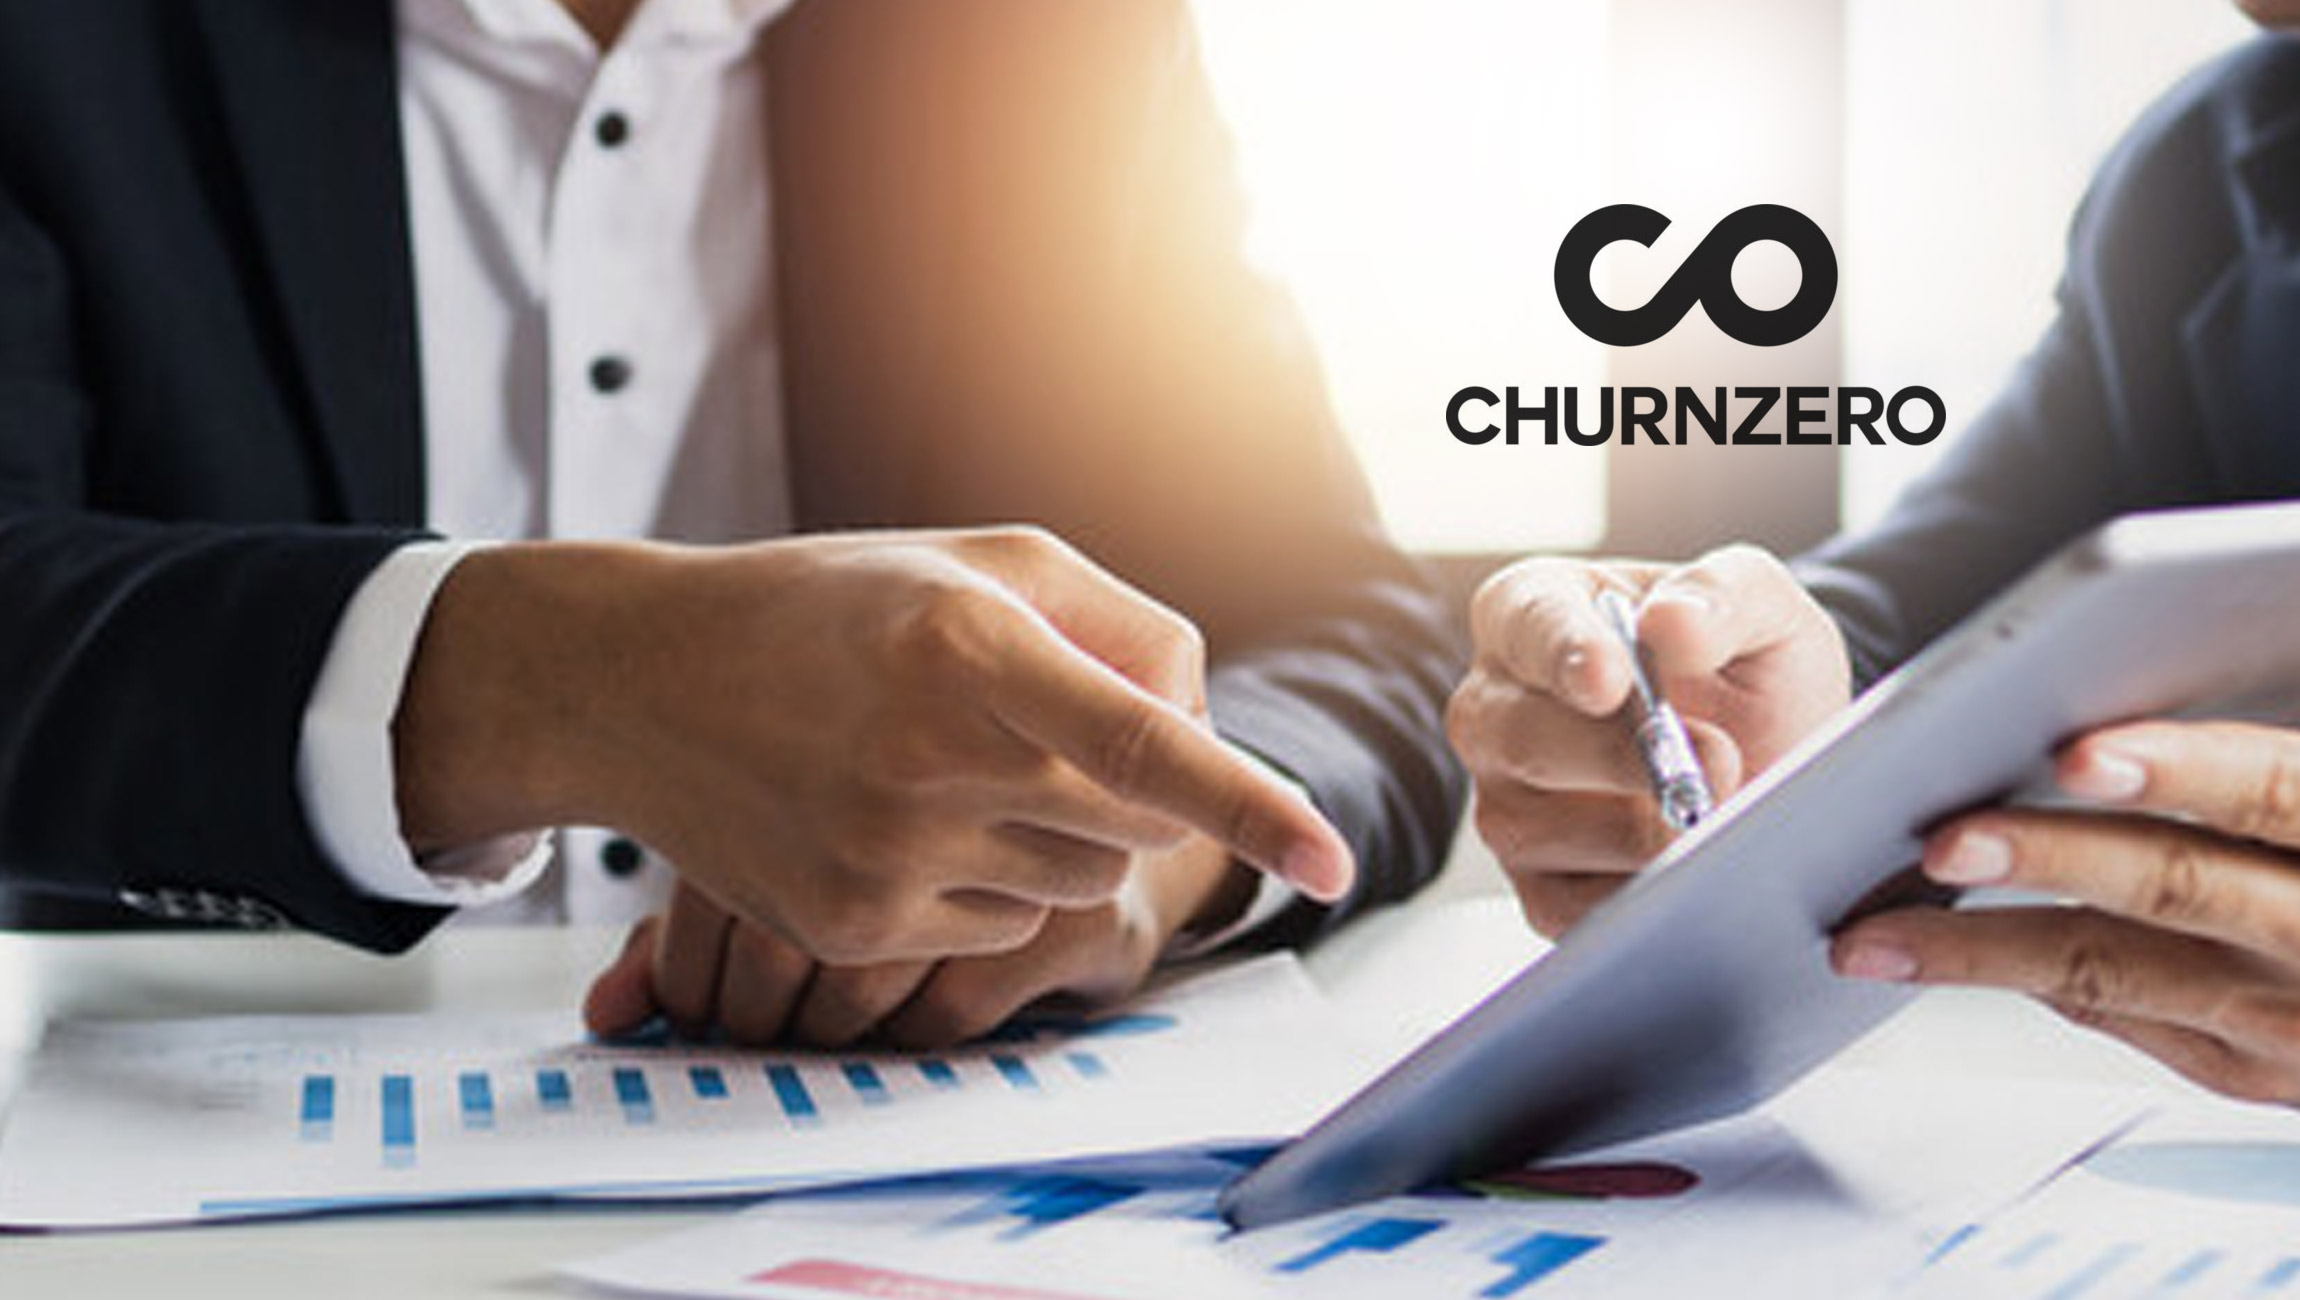 ChurnZero Recognized for Best Feature Set and Relationships in Customer Success Software